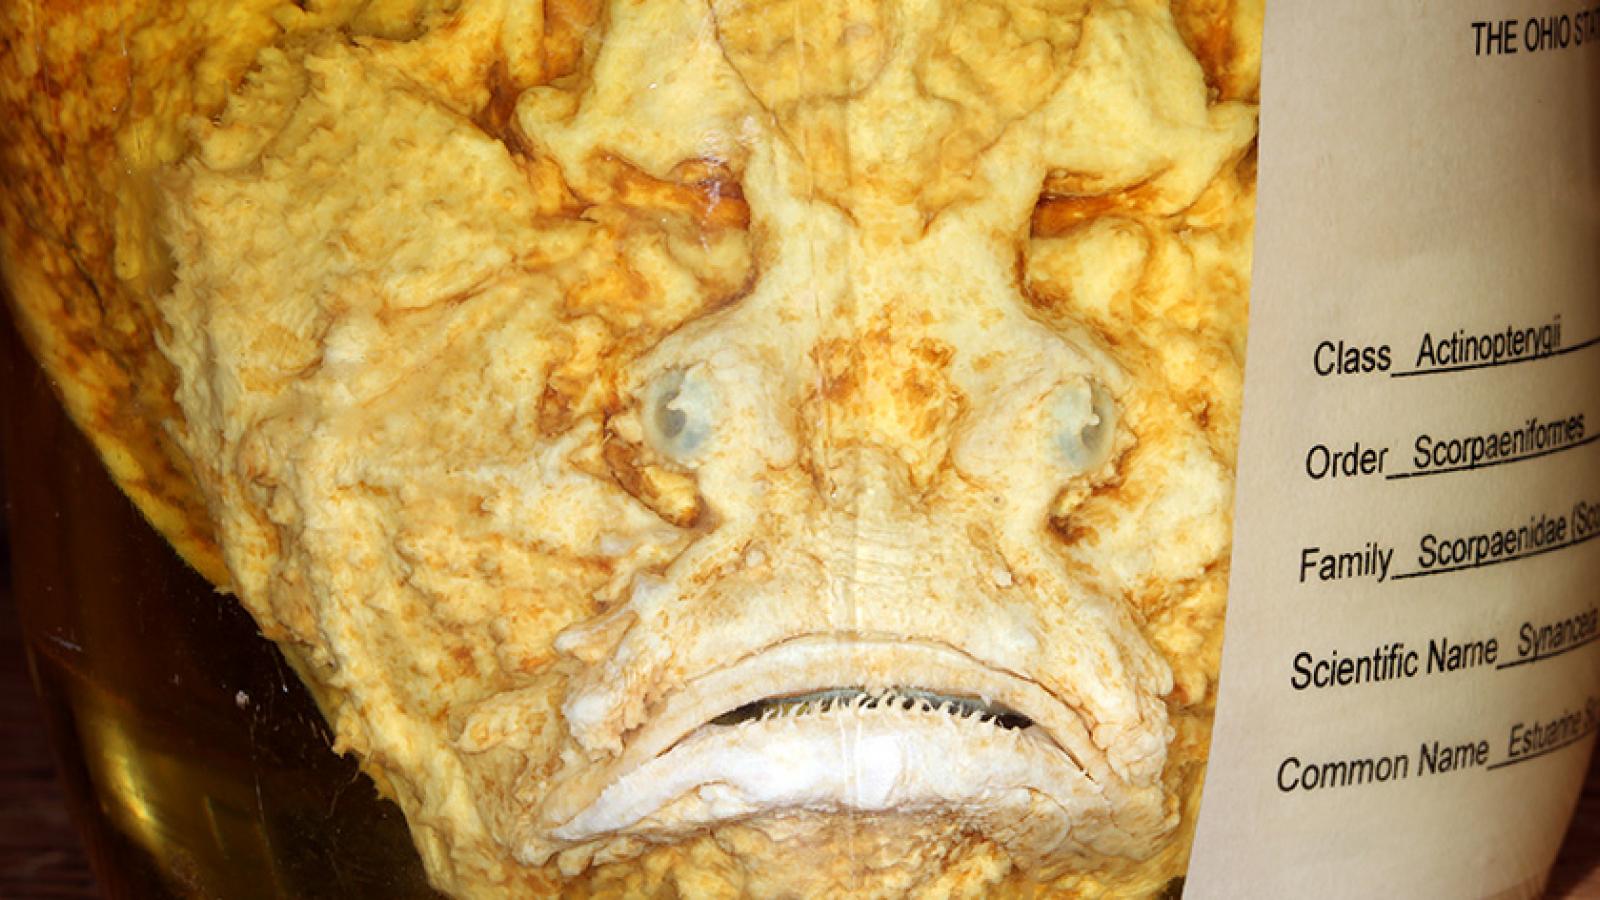 Scorpion fish specimen from the OSU Fish collection